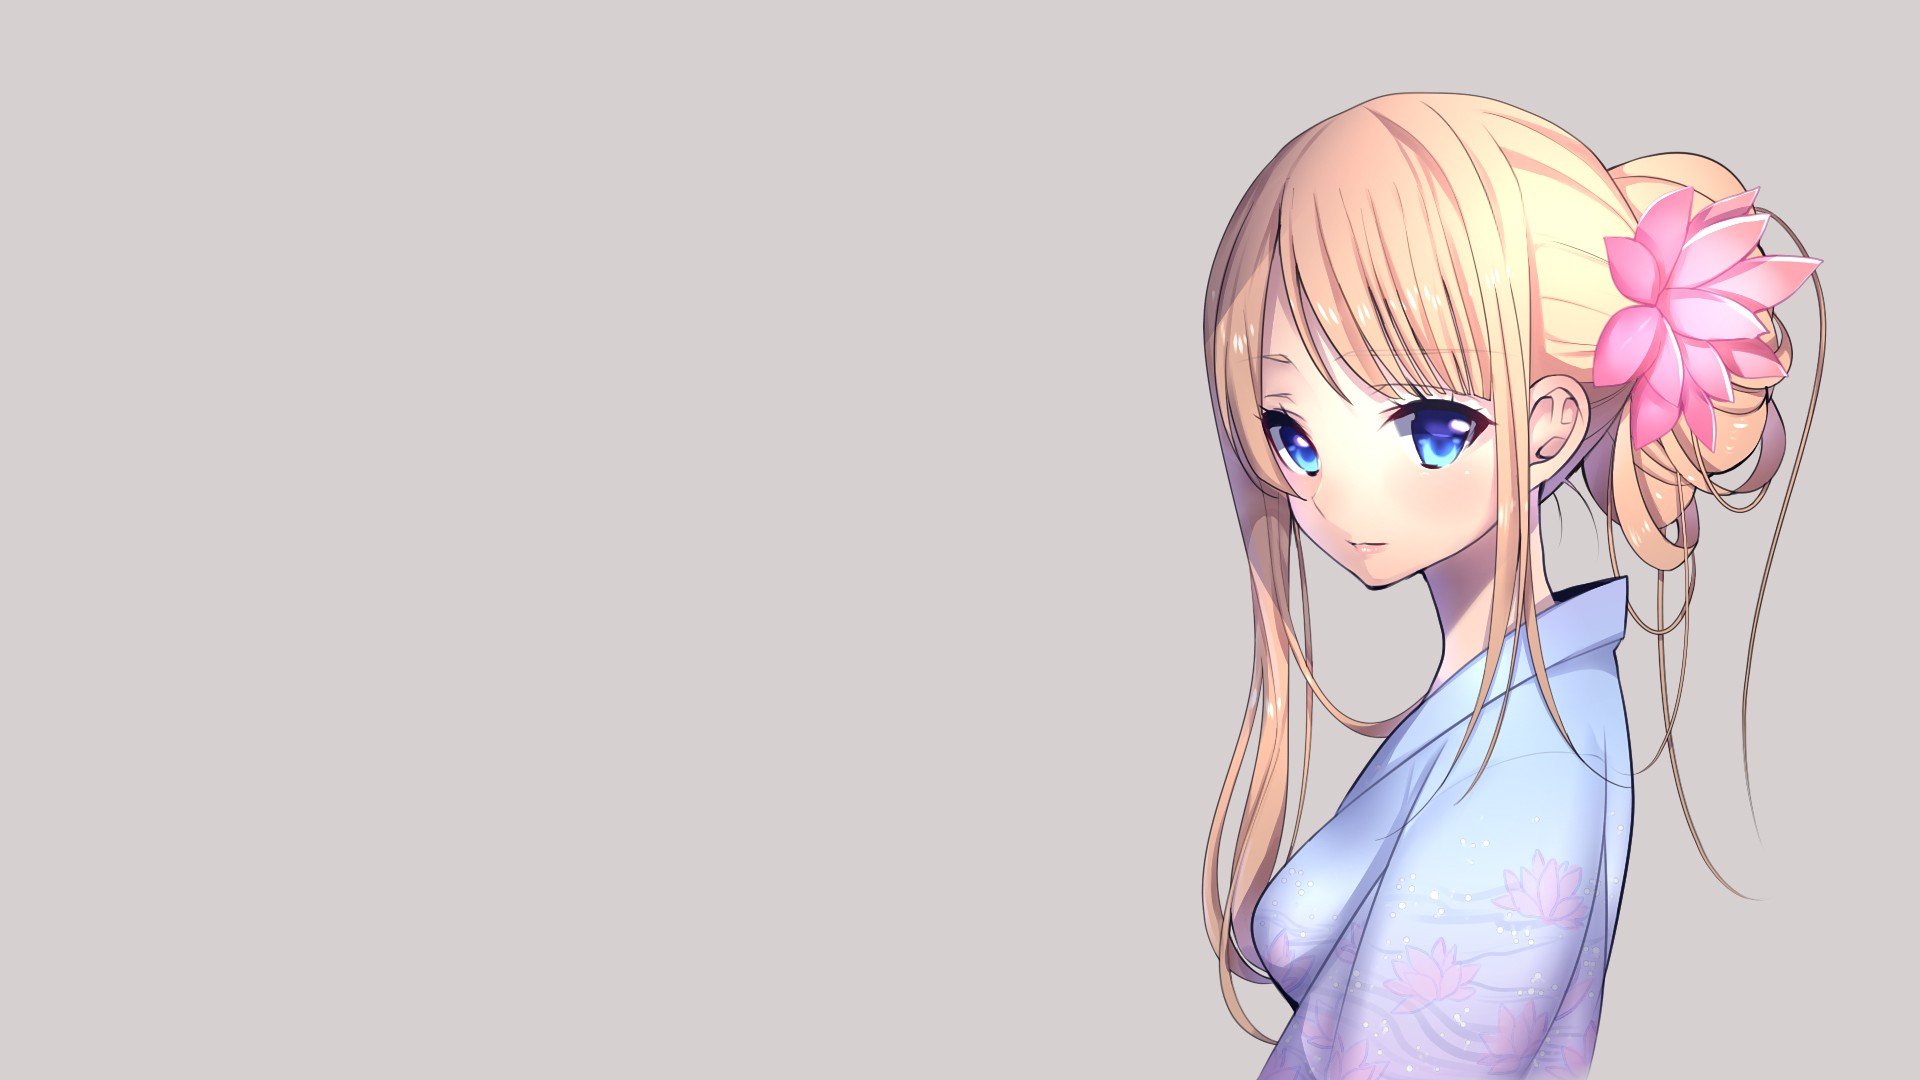 blondes, Blue, Eyes, Japanese, Clothes, Simple, Background, Anime, Girls, Hair, Ornaments, Grey, Background, Original, Characters Wallpaper